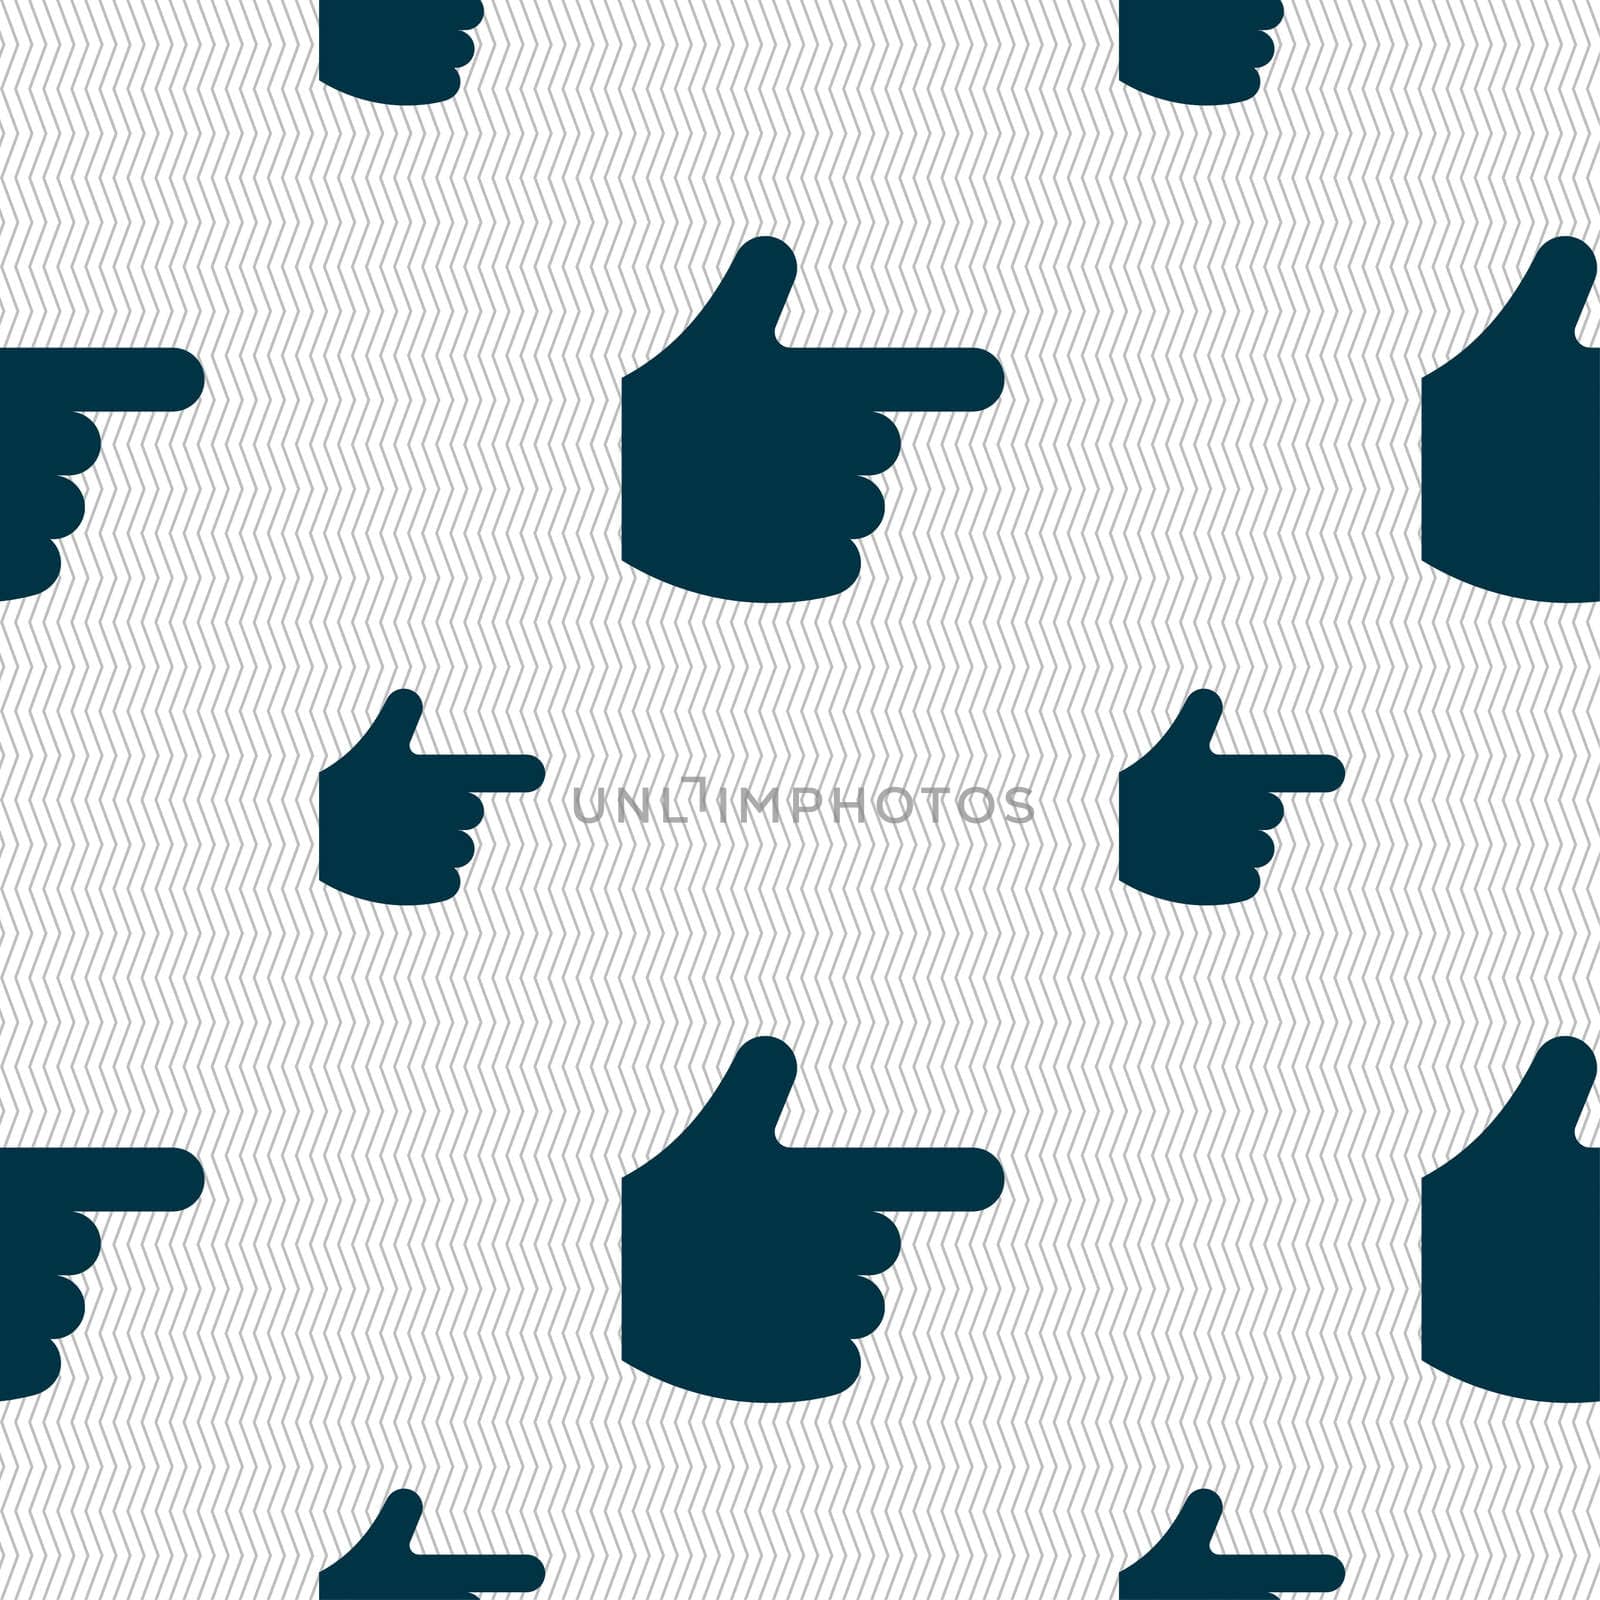 pointing hand icon sign. Seamless pattern with geometric texture. illustration